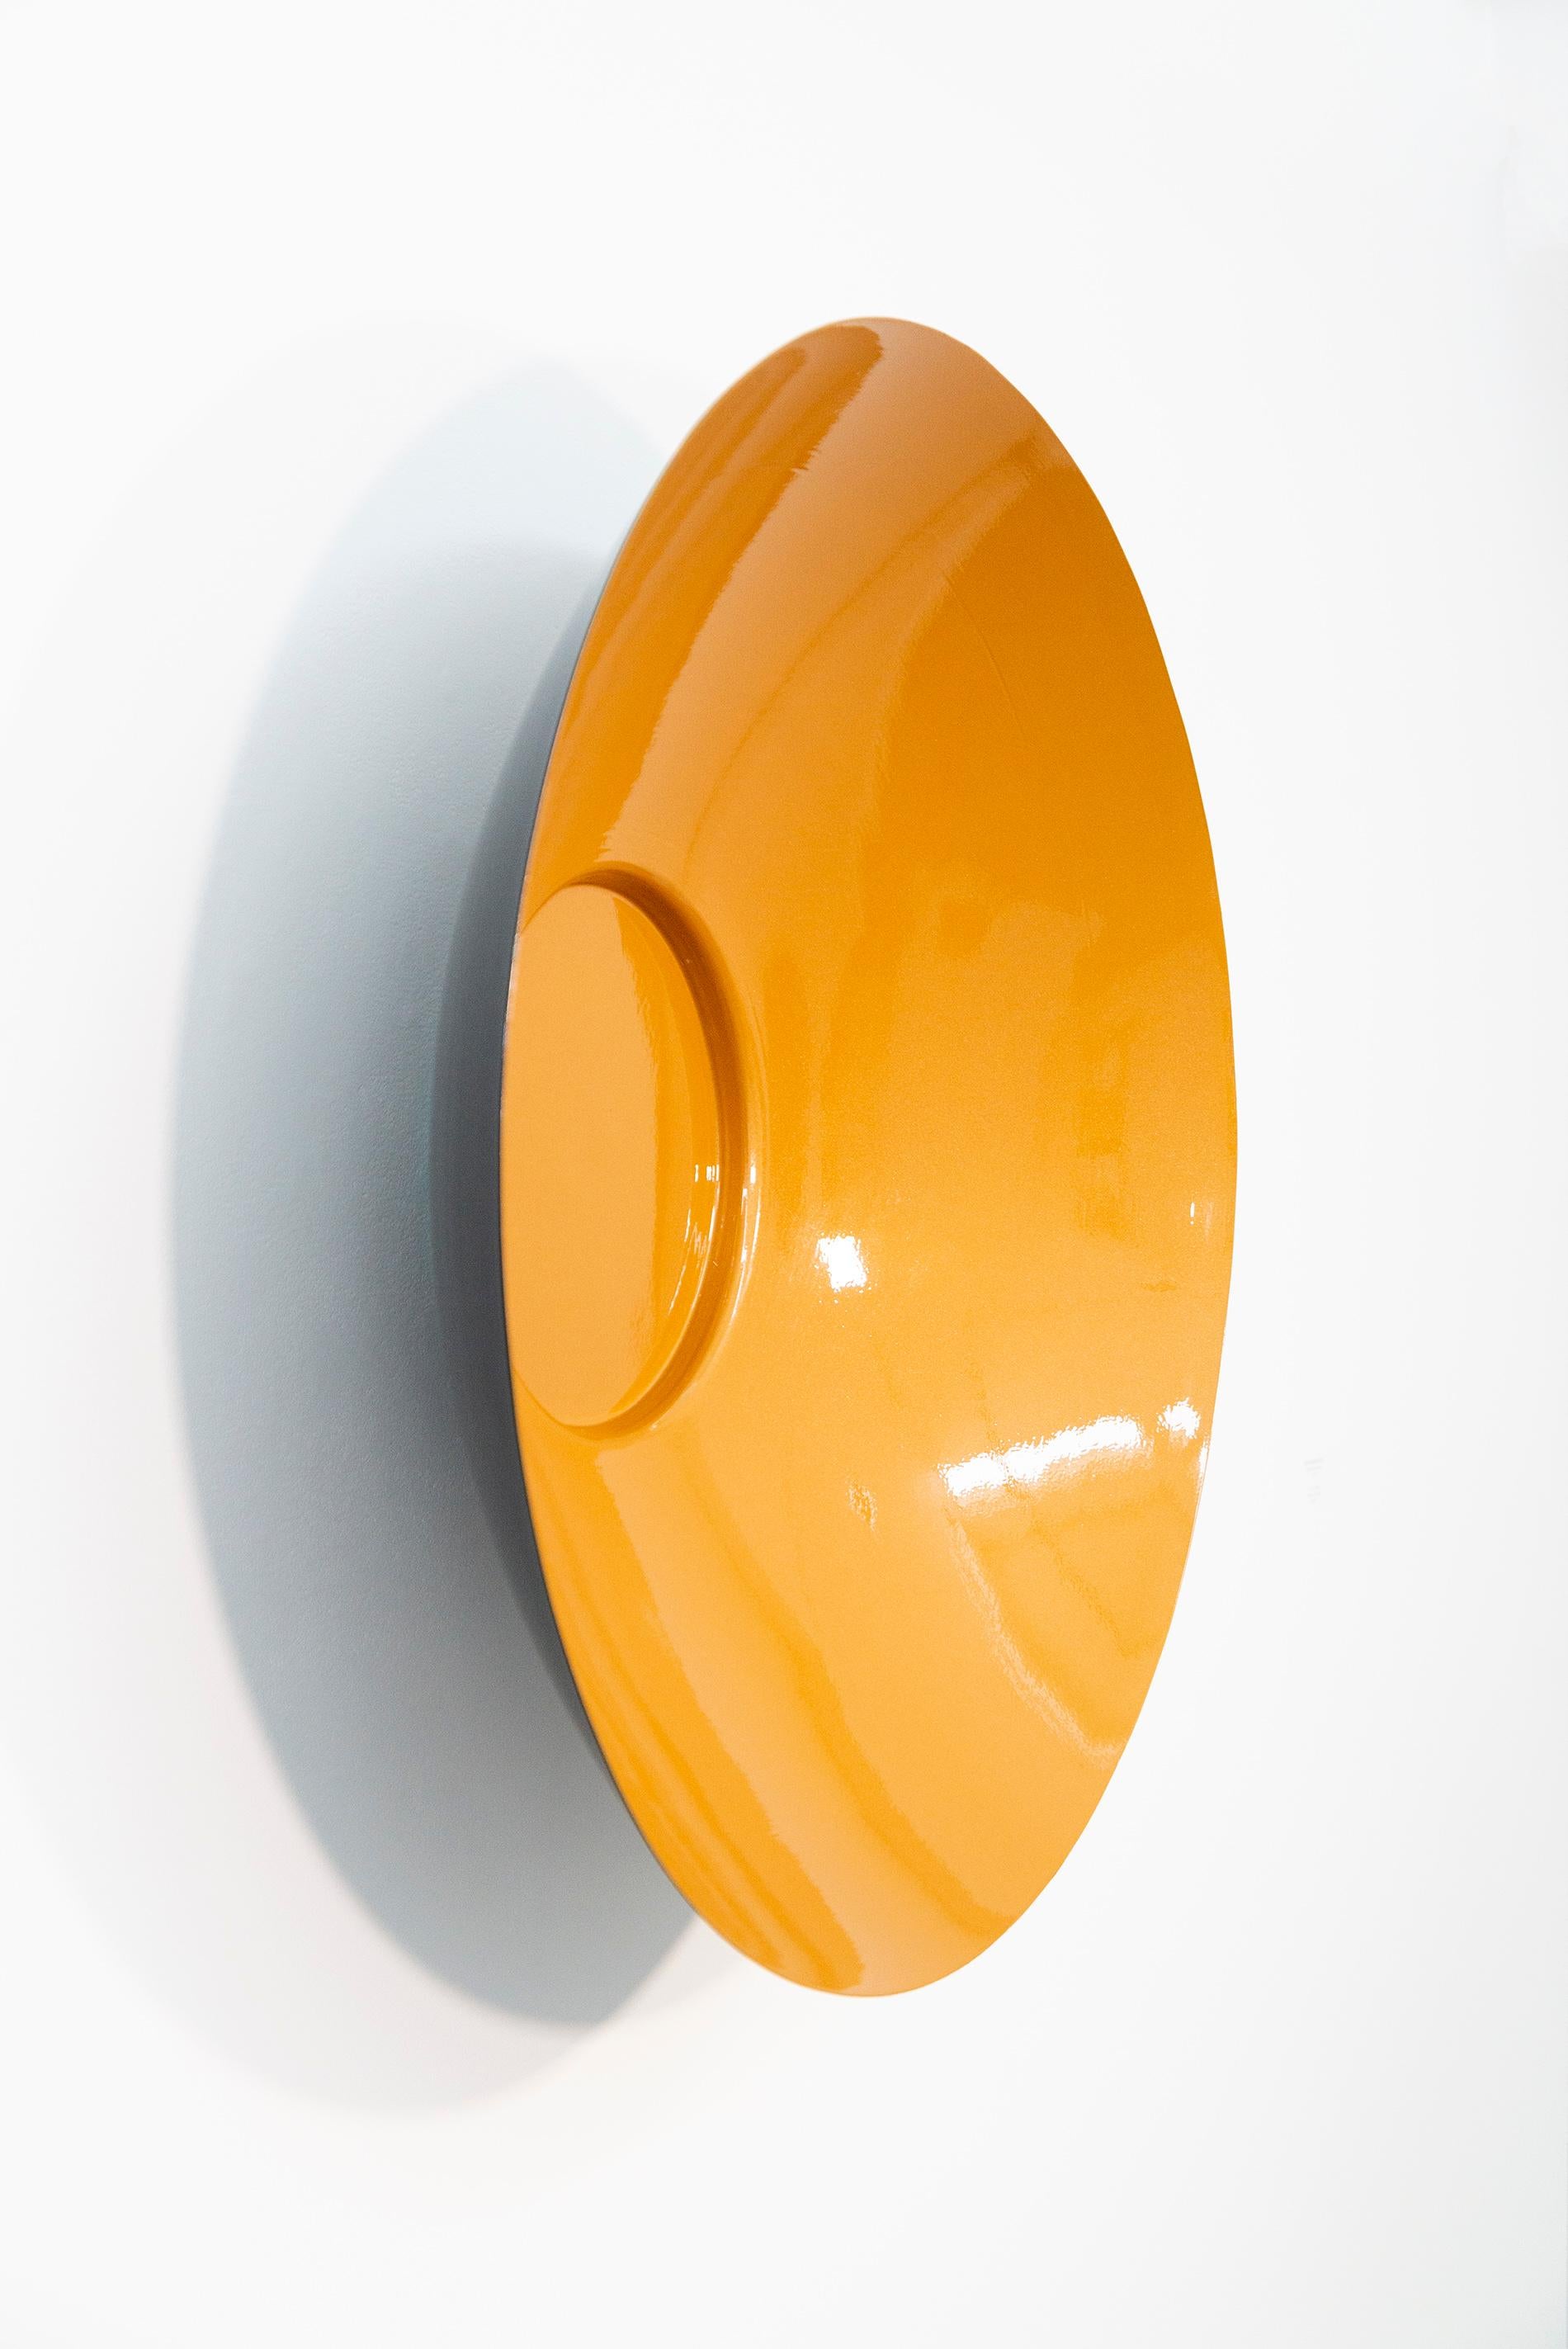 Singing Vessel Citrine Gold 32 - circular, contemporary, steel wall sculpture - Sculpture by Marlene Hilton Moore